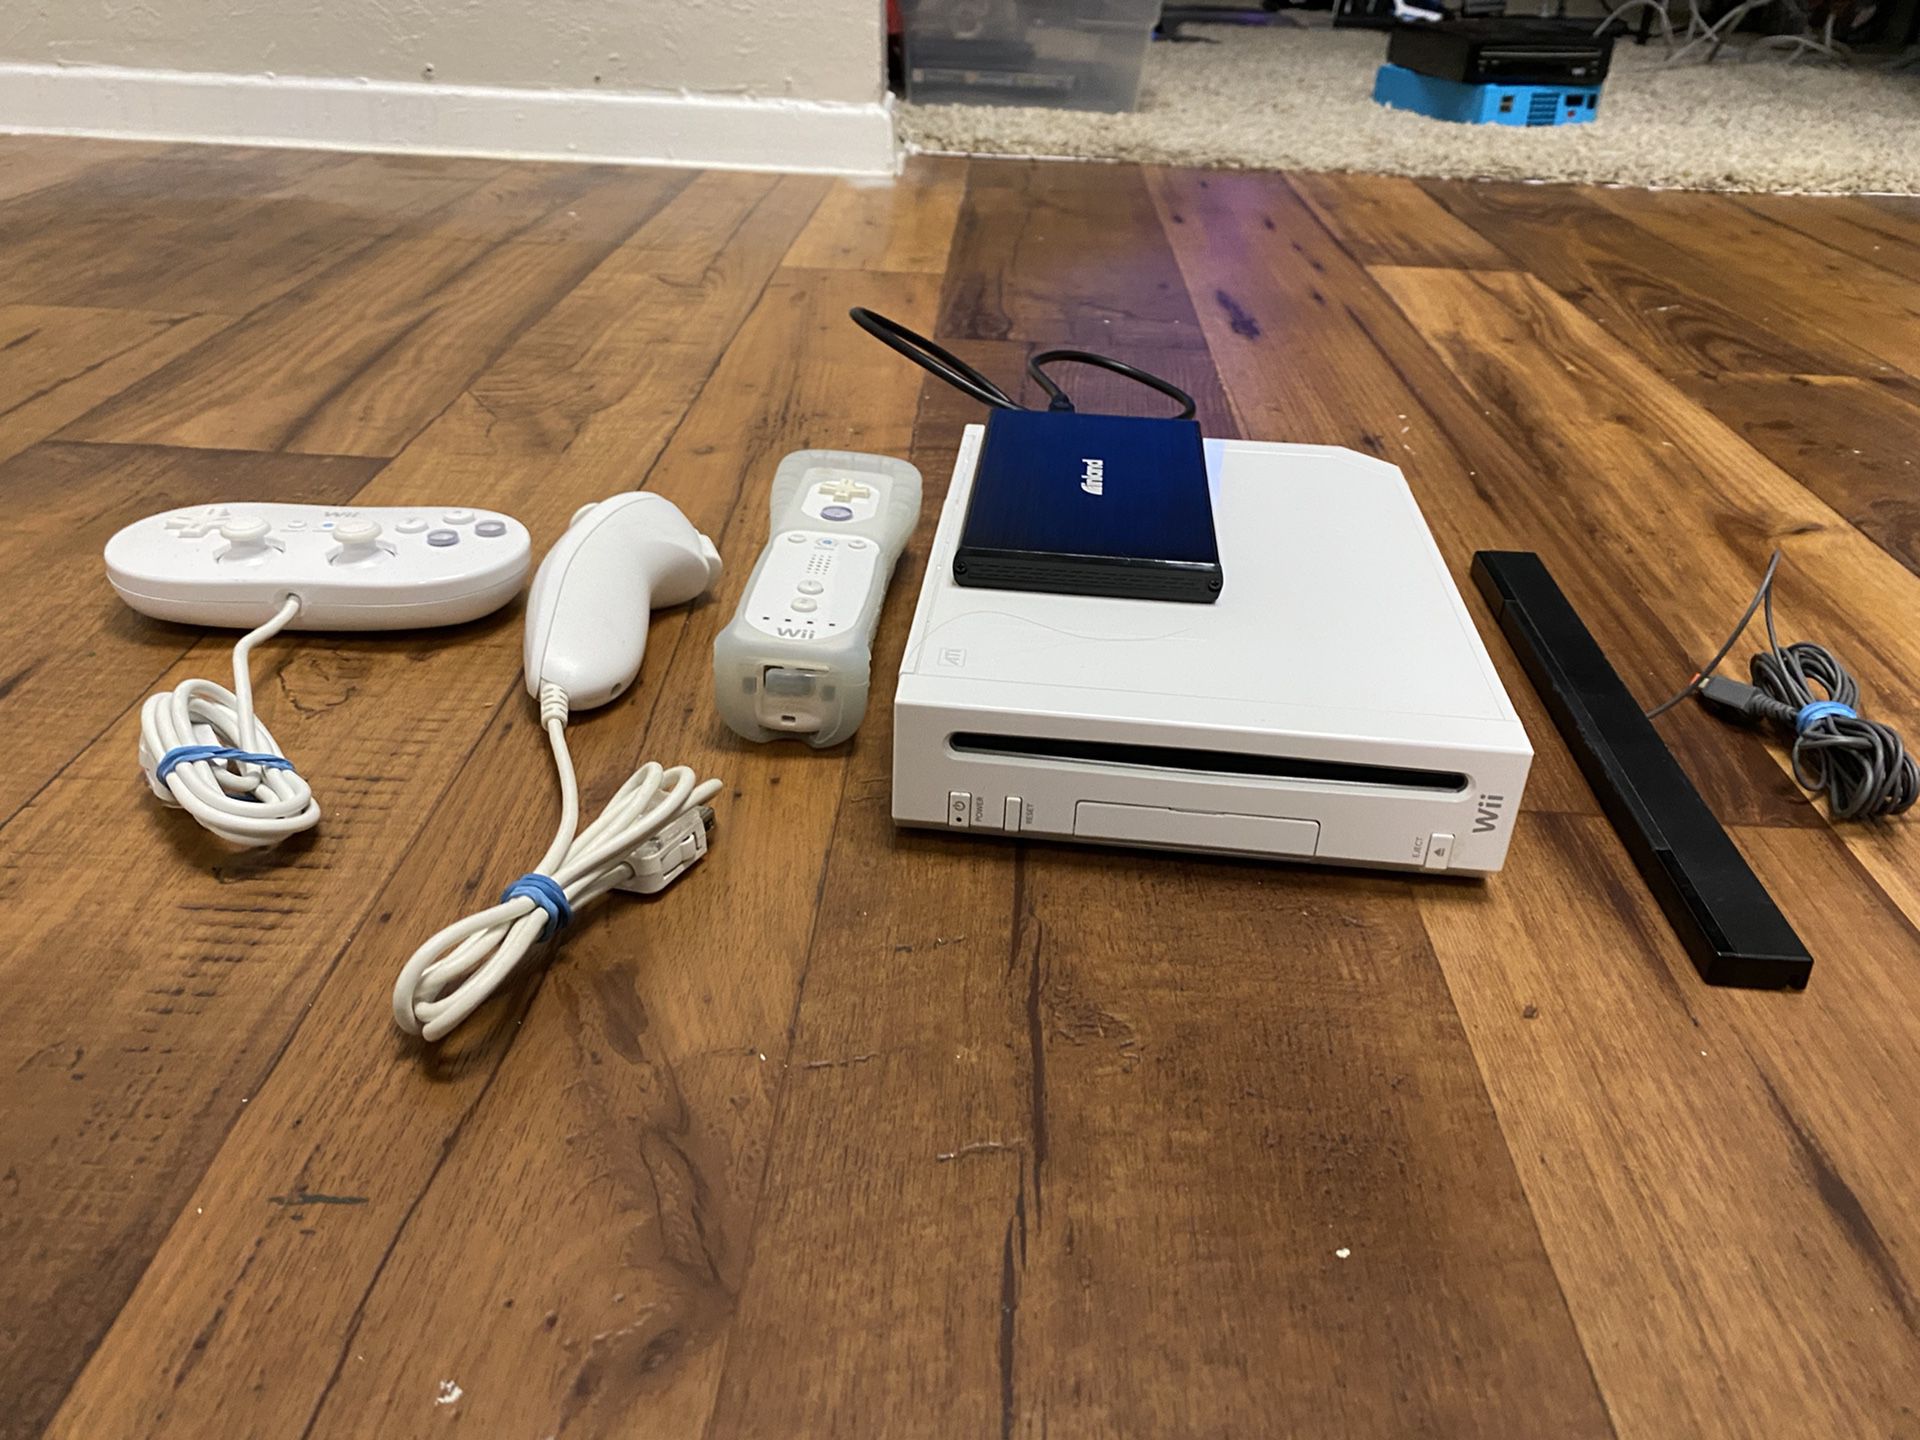 Wii 500gb Home brew Mod - See Pics For More Info - Only One Left!